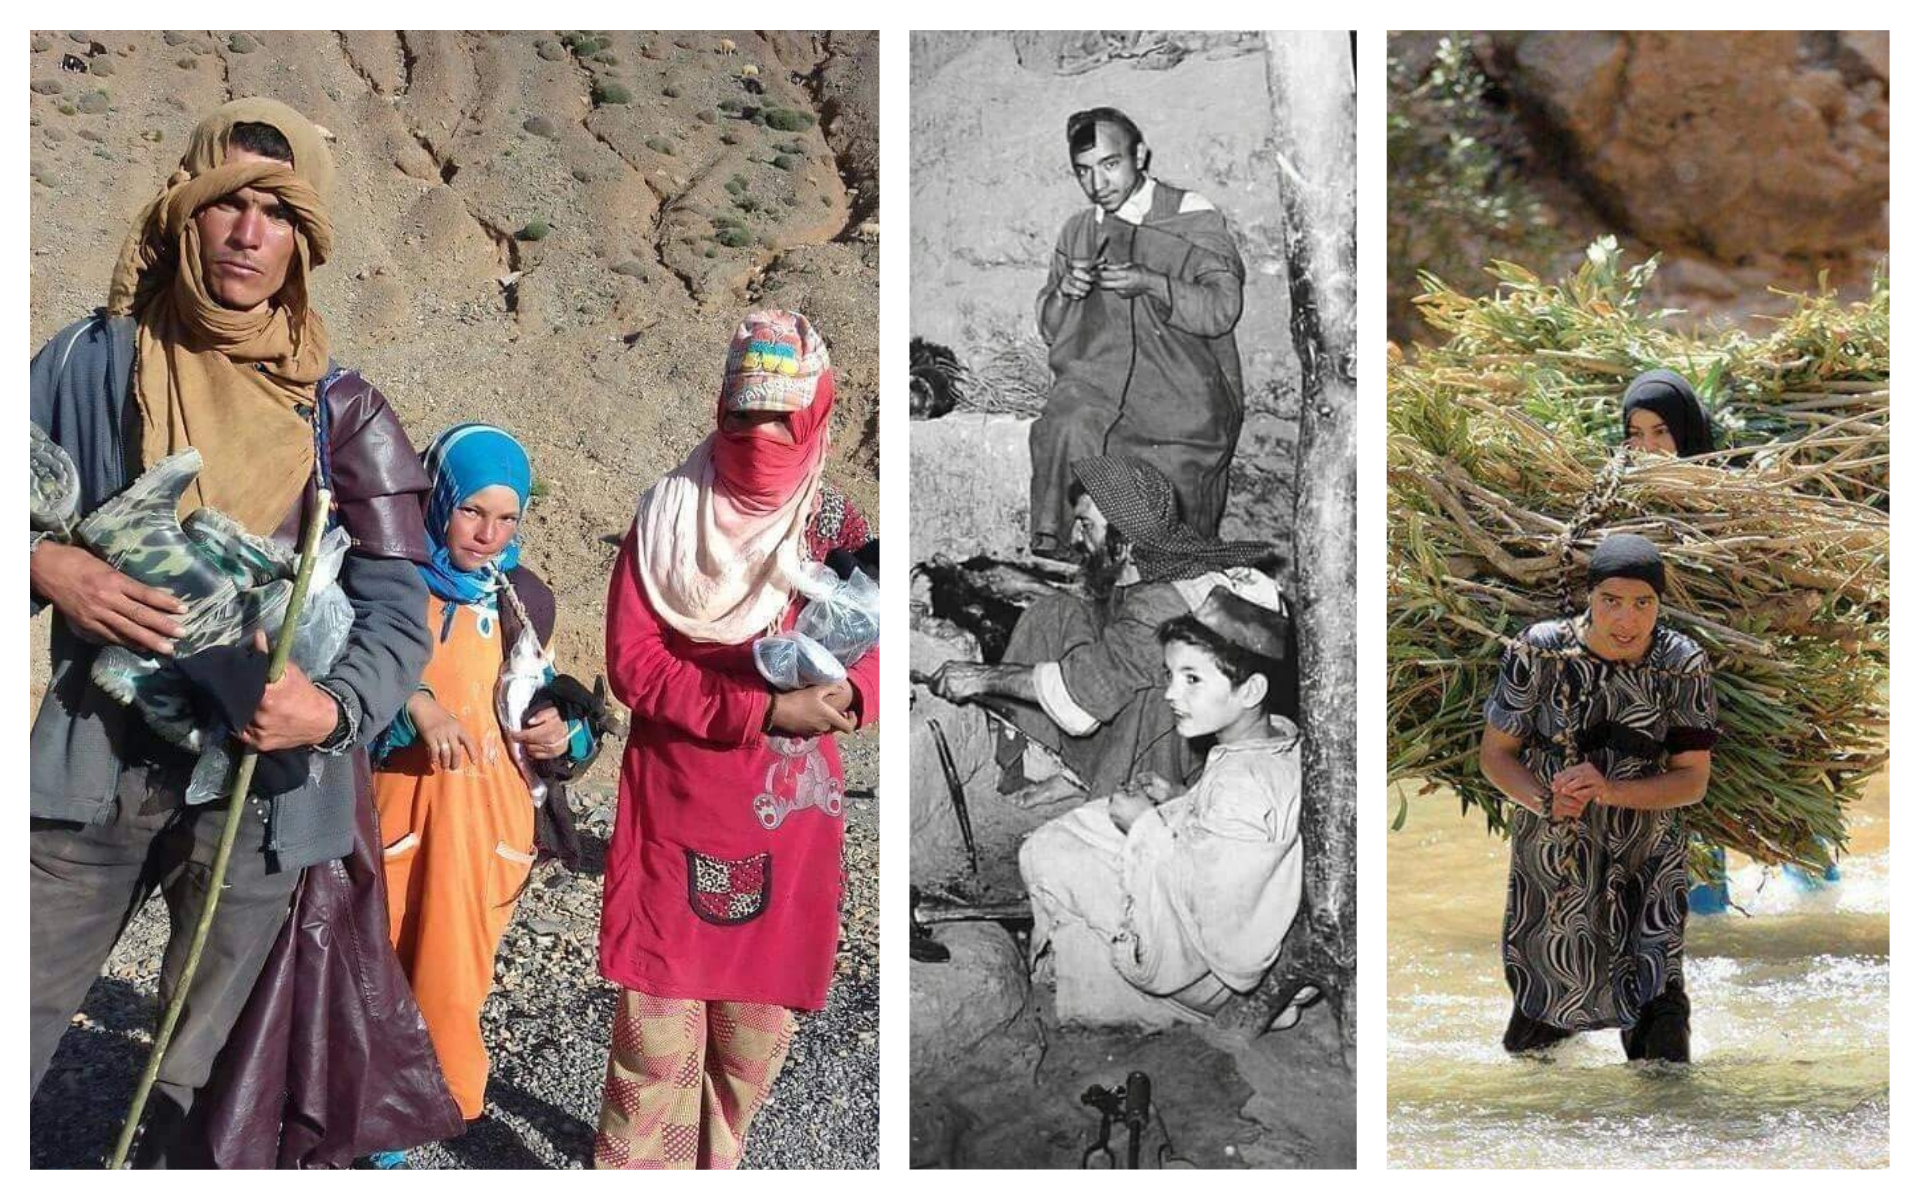 From left: Villagers from Agoudal with gear purchased with money raised by the GoFundMe page managed by Martha Rettig and Denise Marie; A Jewish-Amazigh workshop in the Atlas mountains in the 1950s; Amazigh women cross a river bearing loads on their backs. (Courtesy)